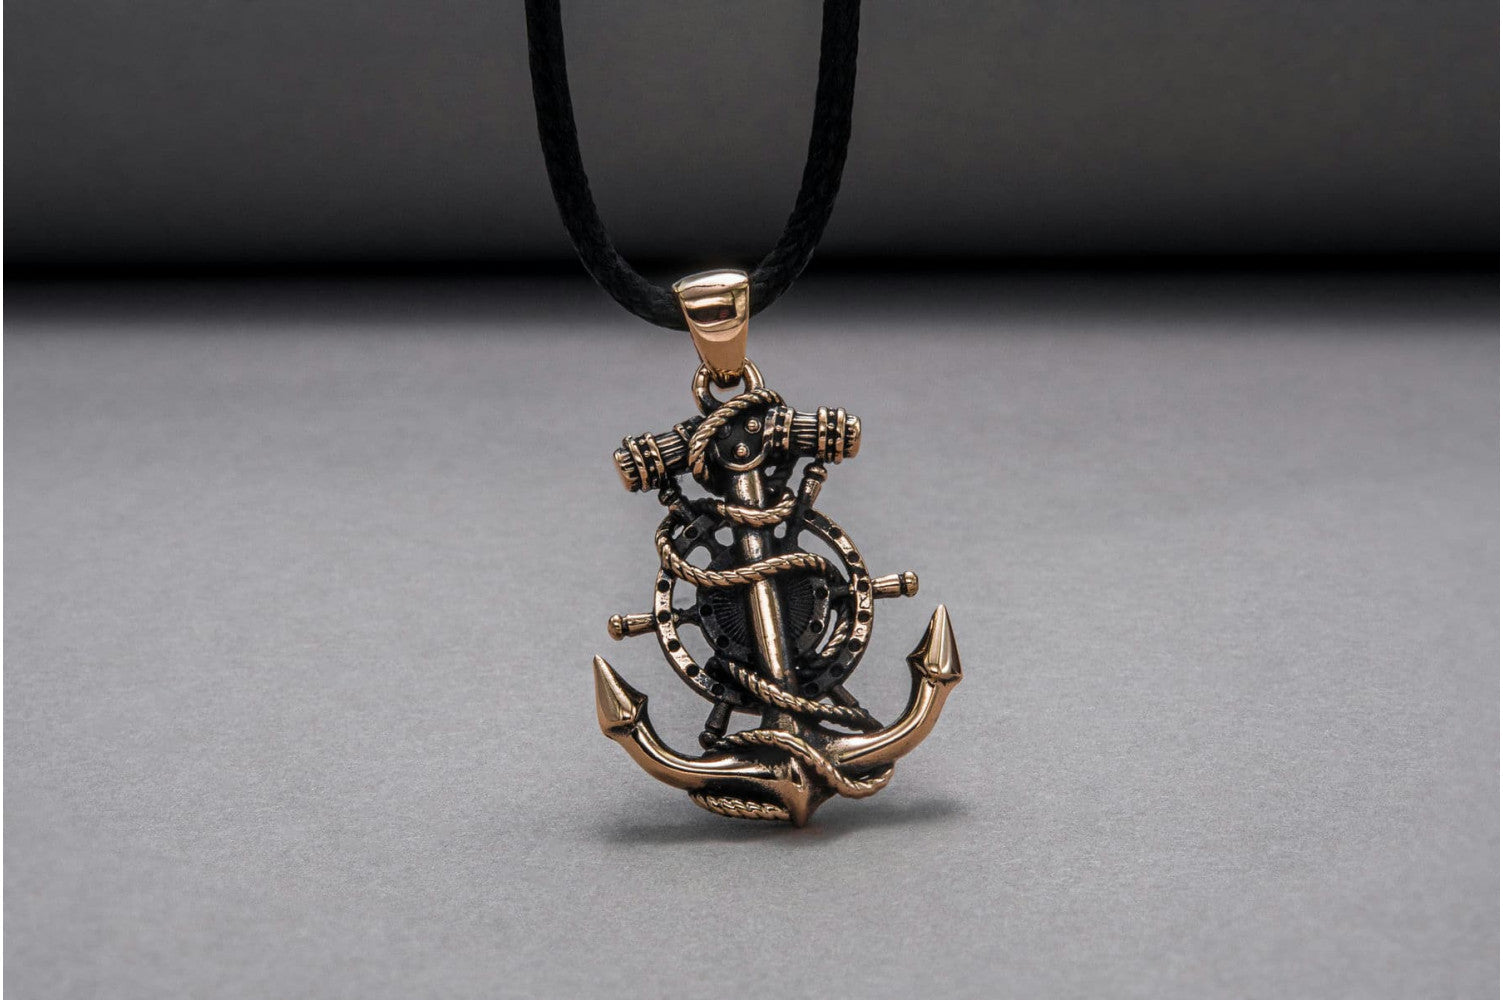 Anchor Symbol with Compass Pendant Bronze Handcrafted Jewelry - vikingworkshop